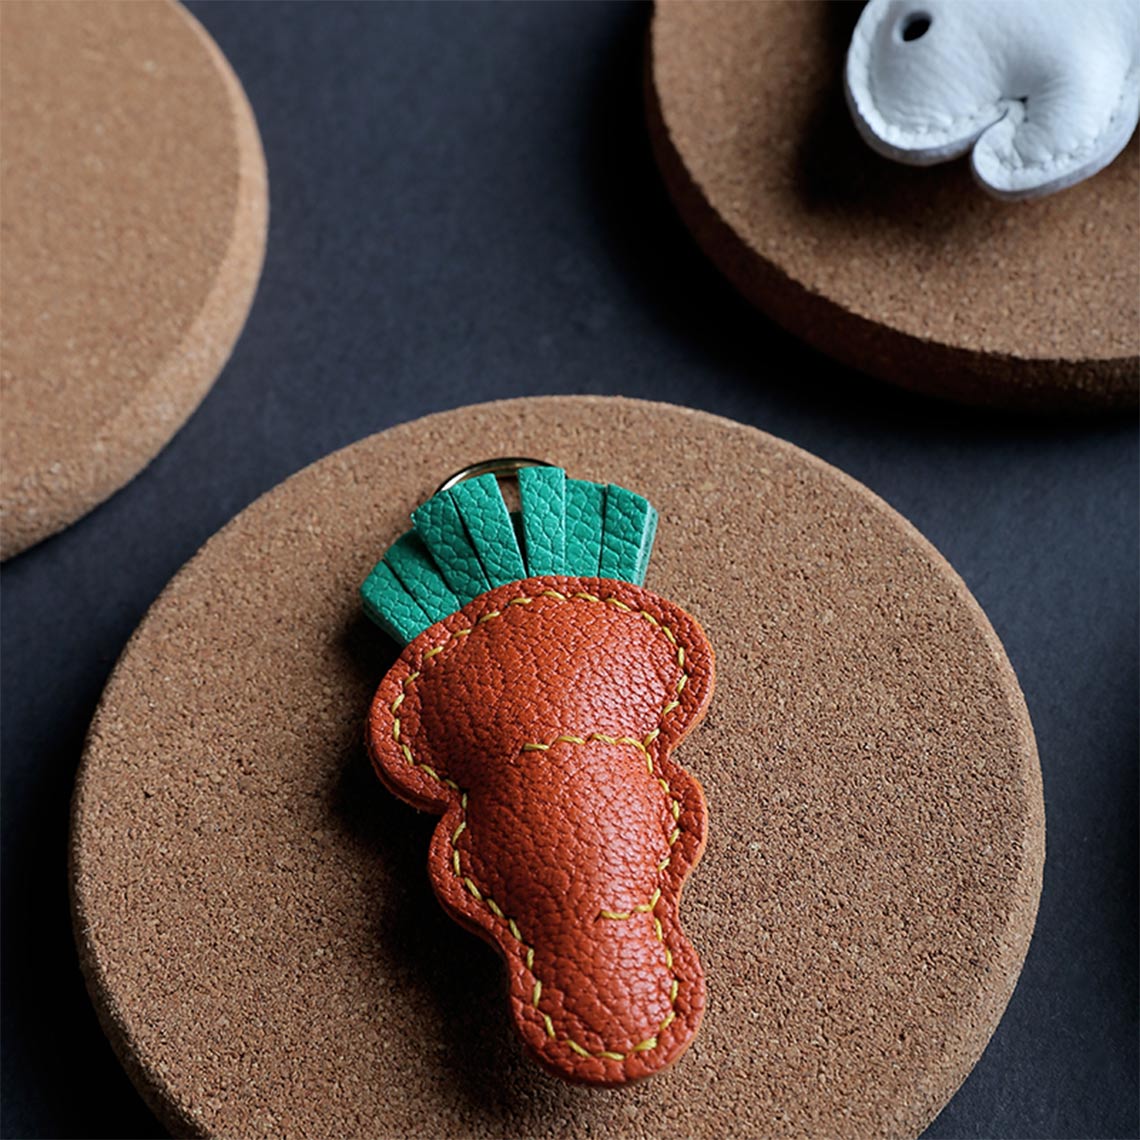 Cute Carrot Bunny Ornament Charm | DIY Gift Ideas for Bunny Rabbit Lovers - POPSEWING™ DIY Leathercrafts